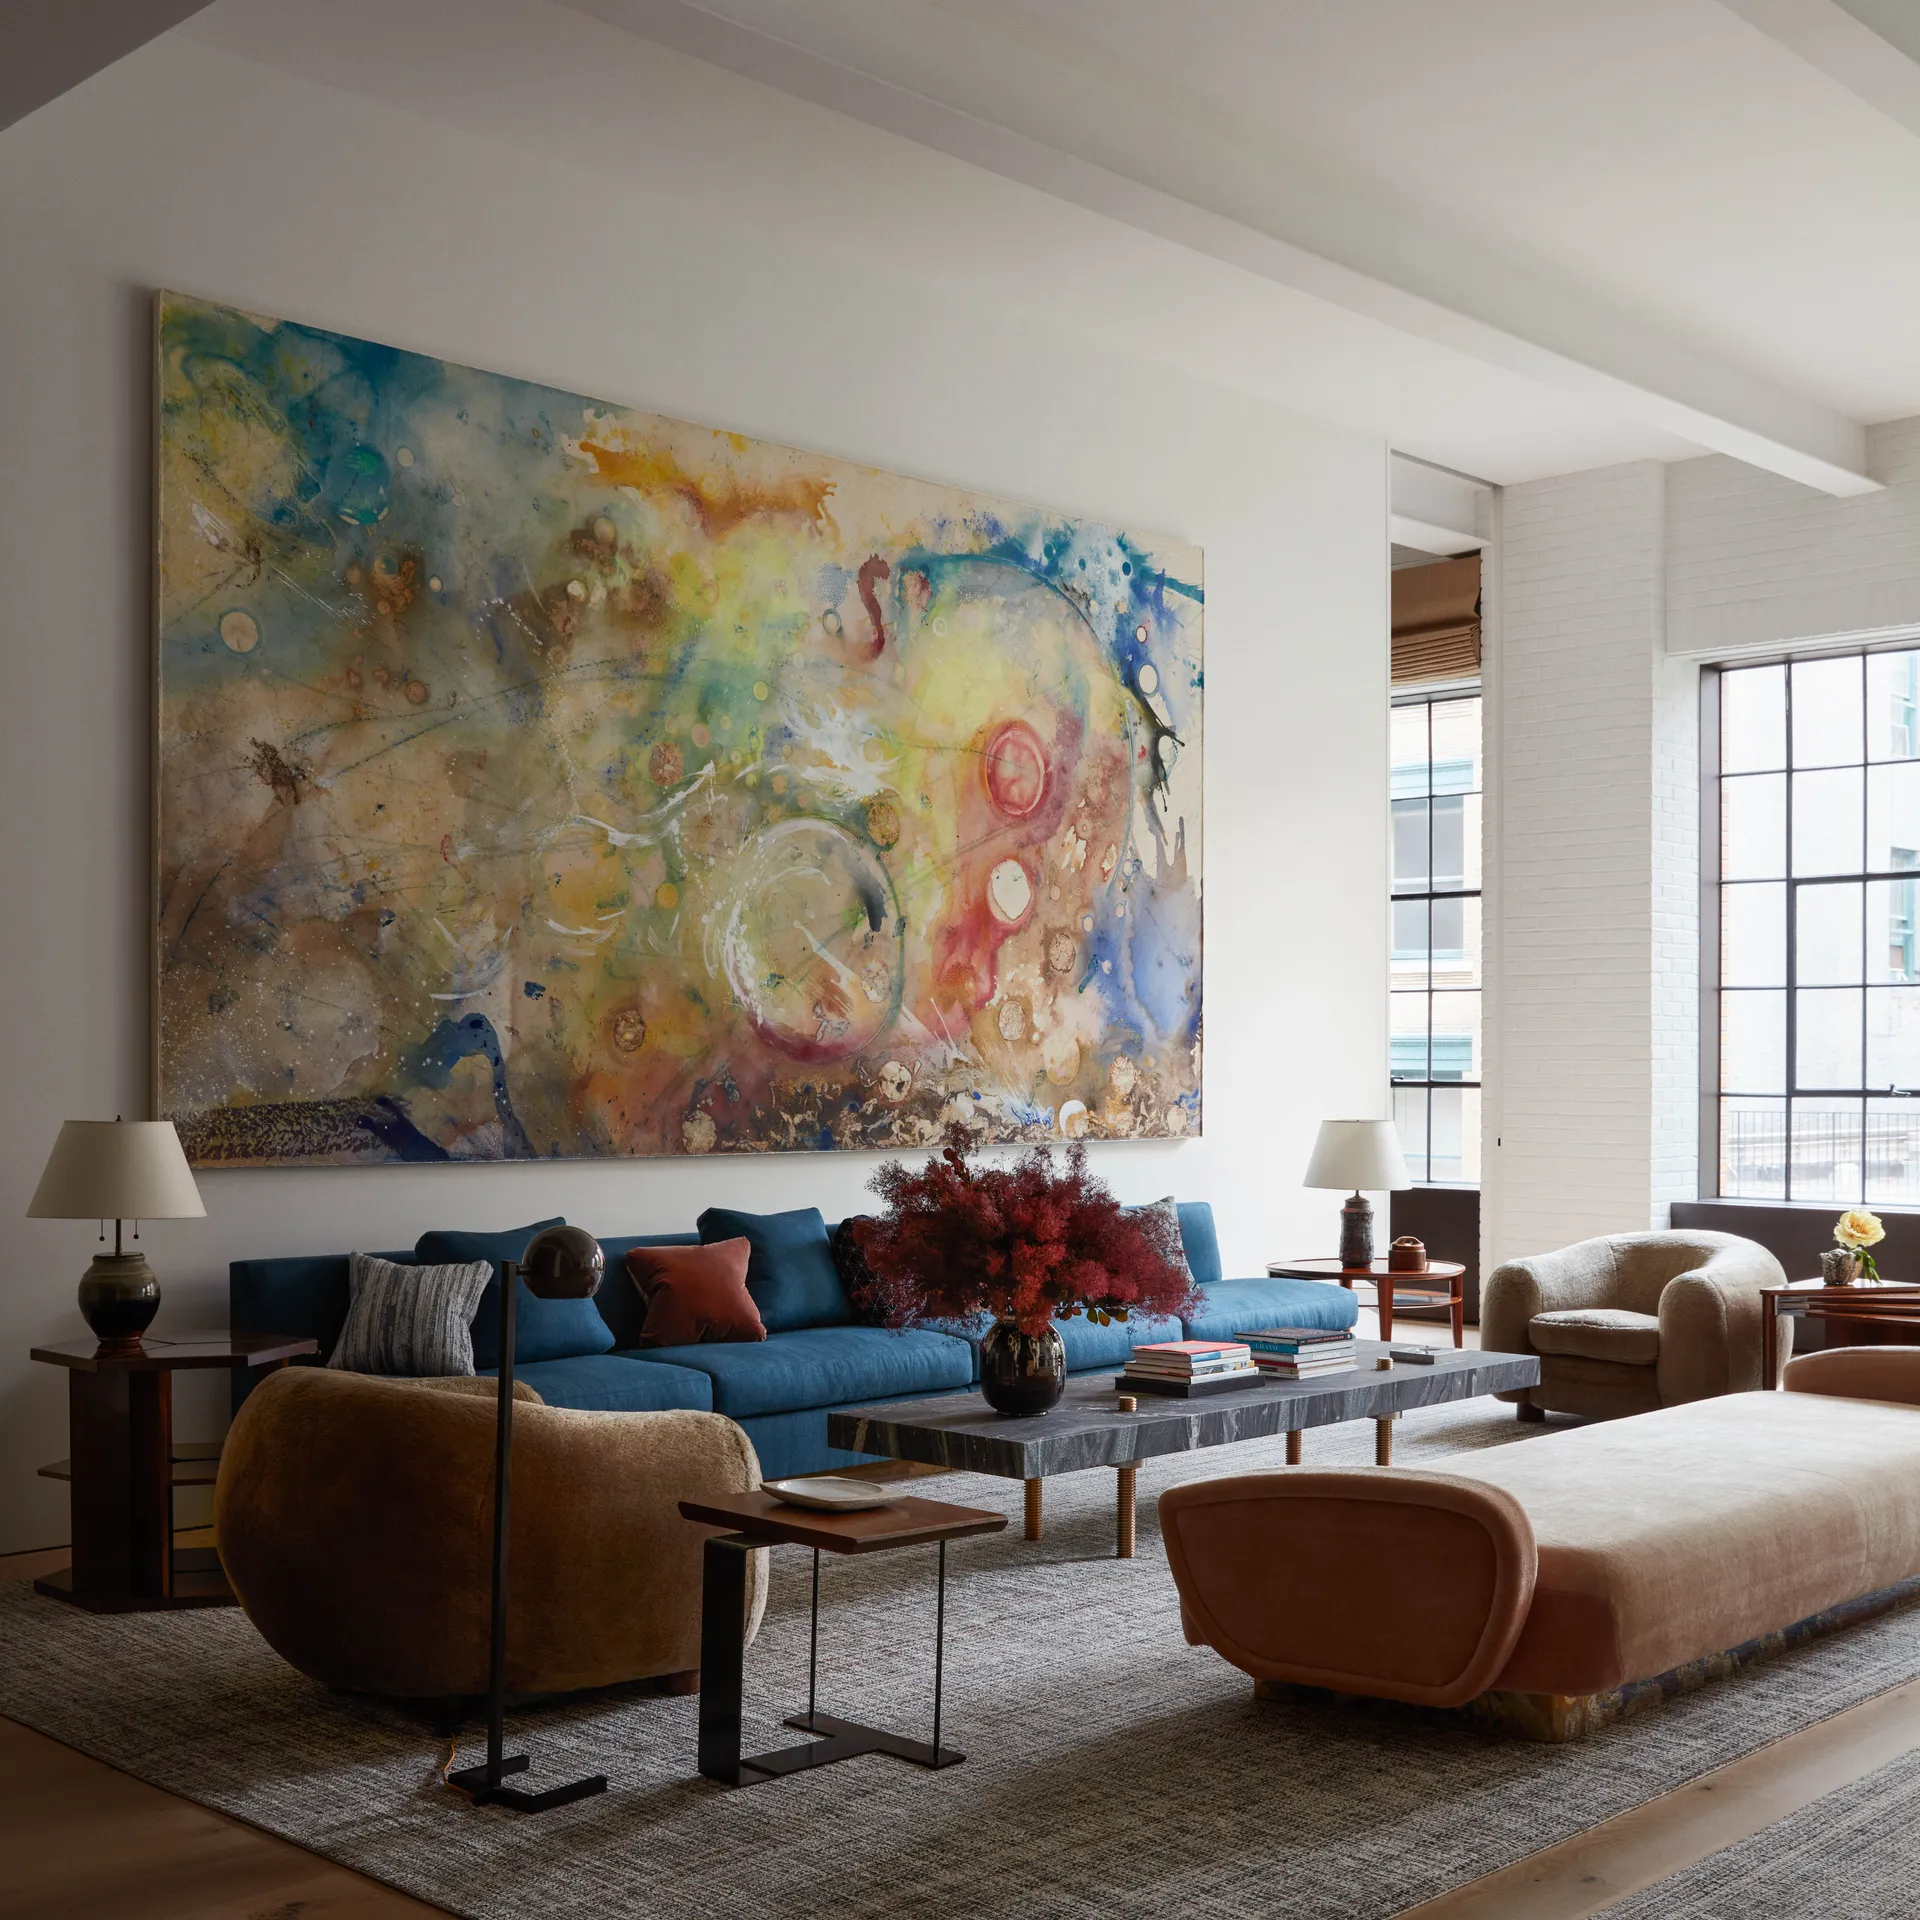 A modern living room with a large art frame in the wall